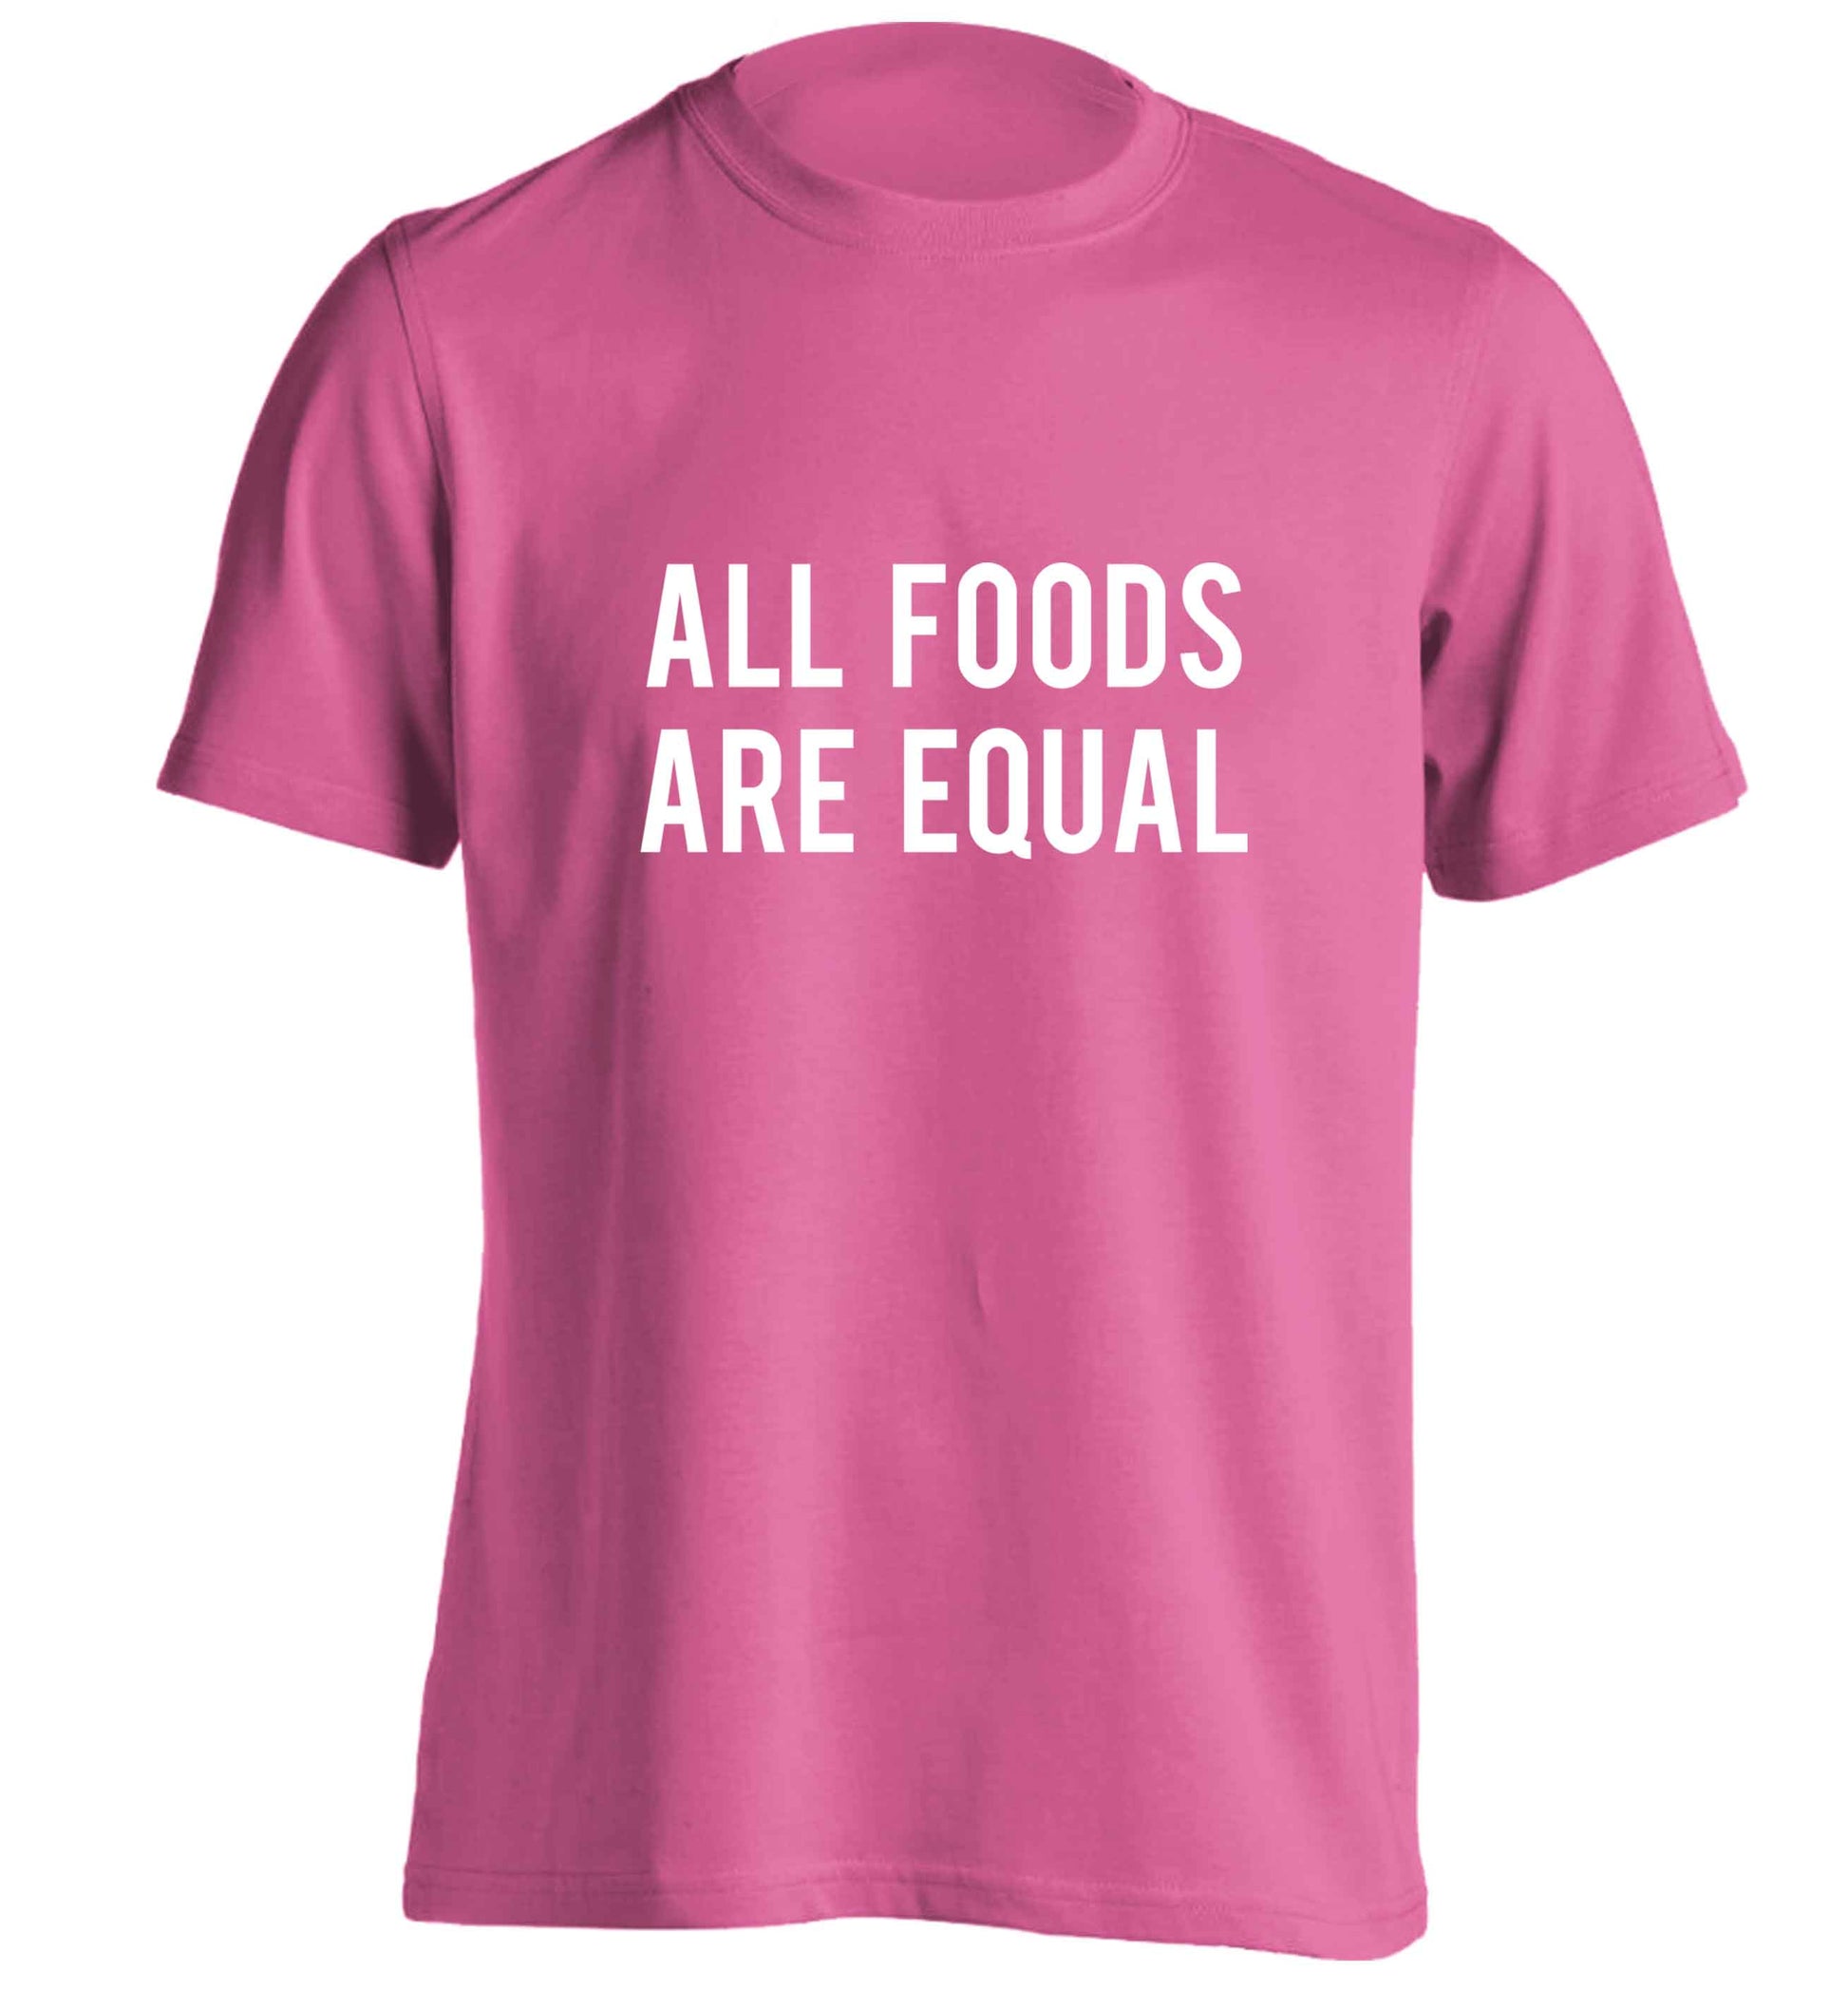 All foods are equal adults unisex pink Tshirt 2XL